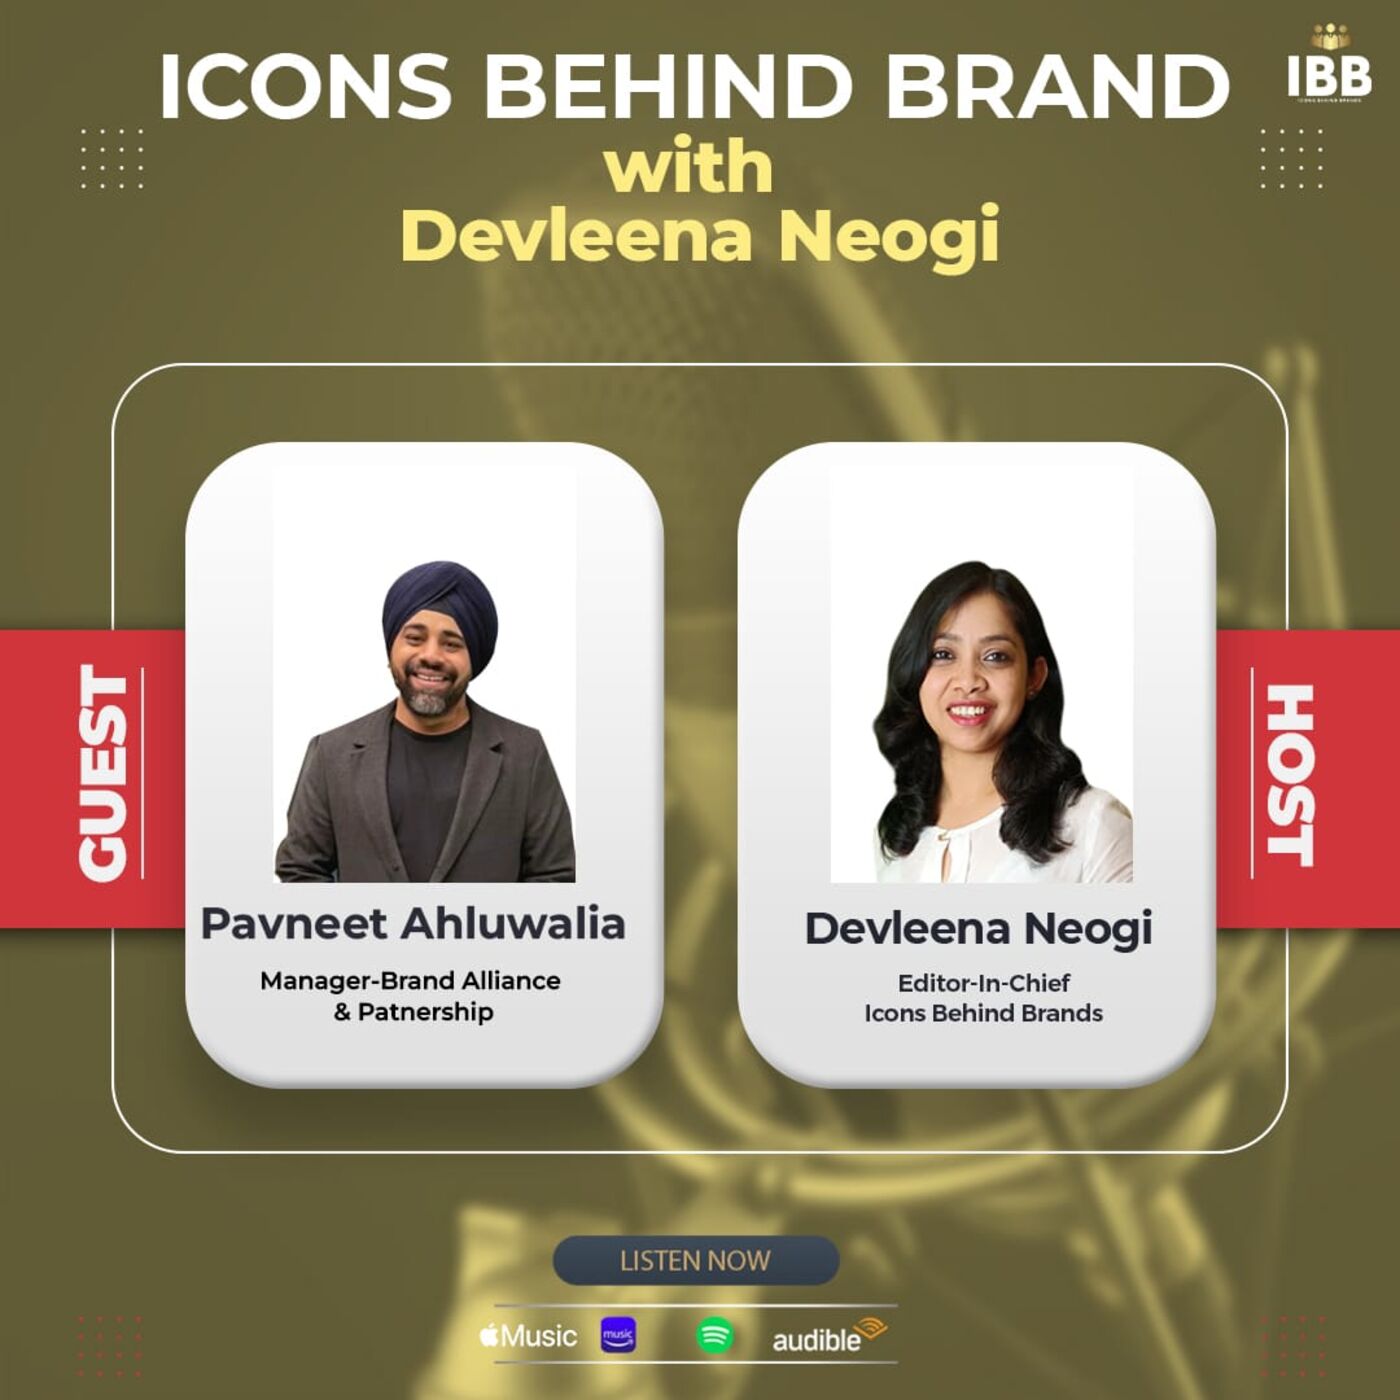 Mr. Pavneet Ahluwalia, Brand Strategic Alliance, and Partnership at Ferns and Petals shares his consumer-oriented marketing tips